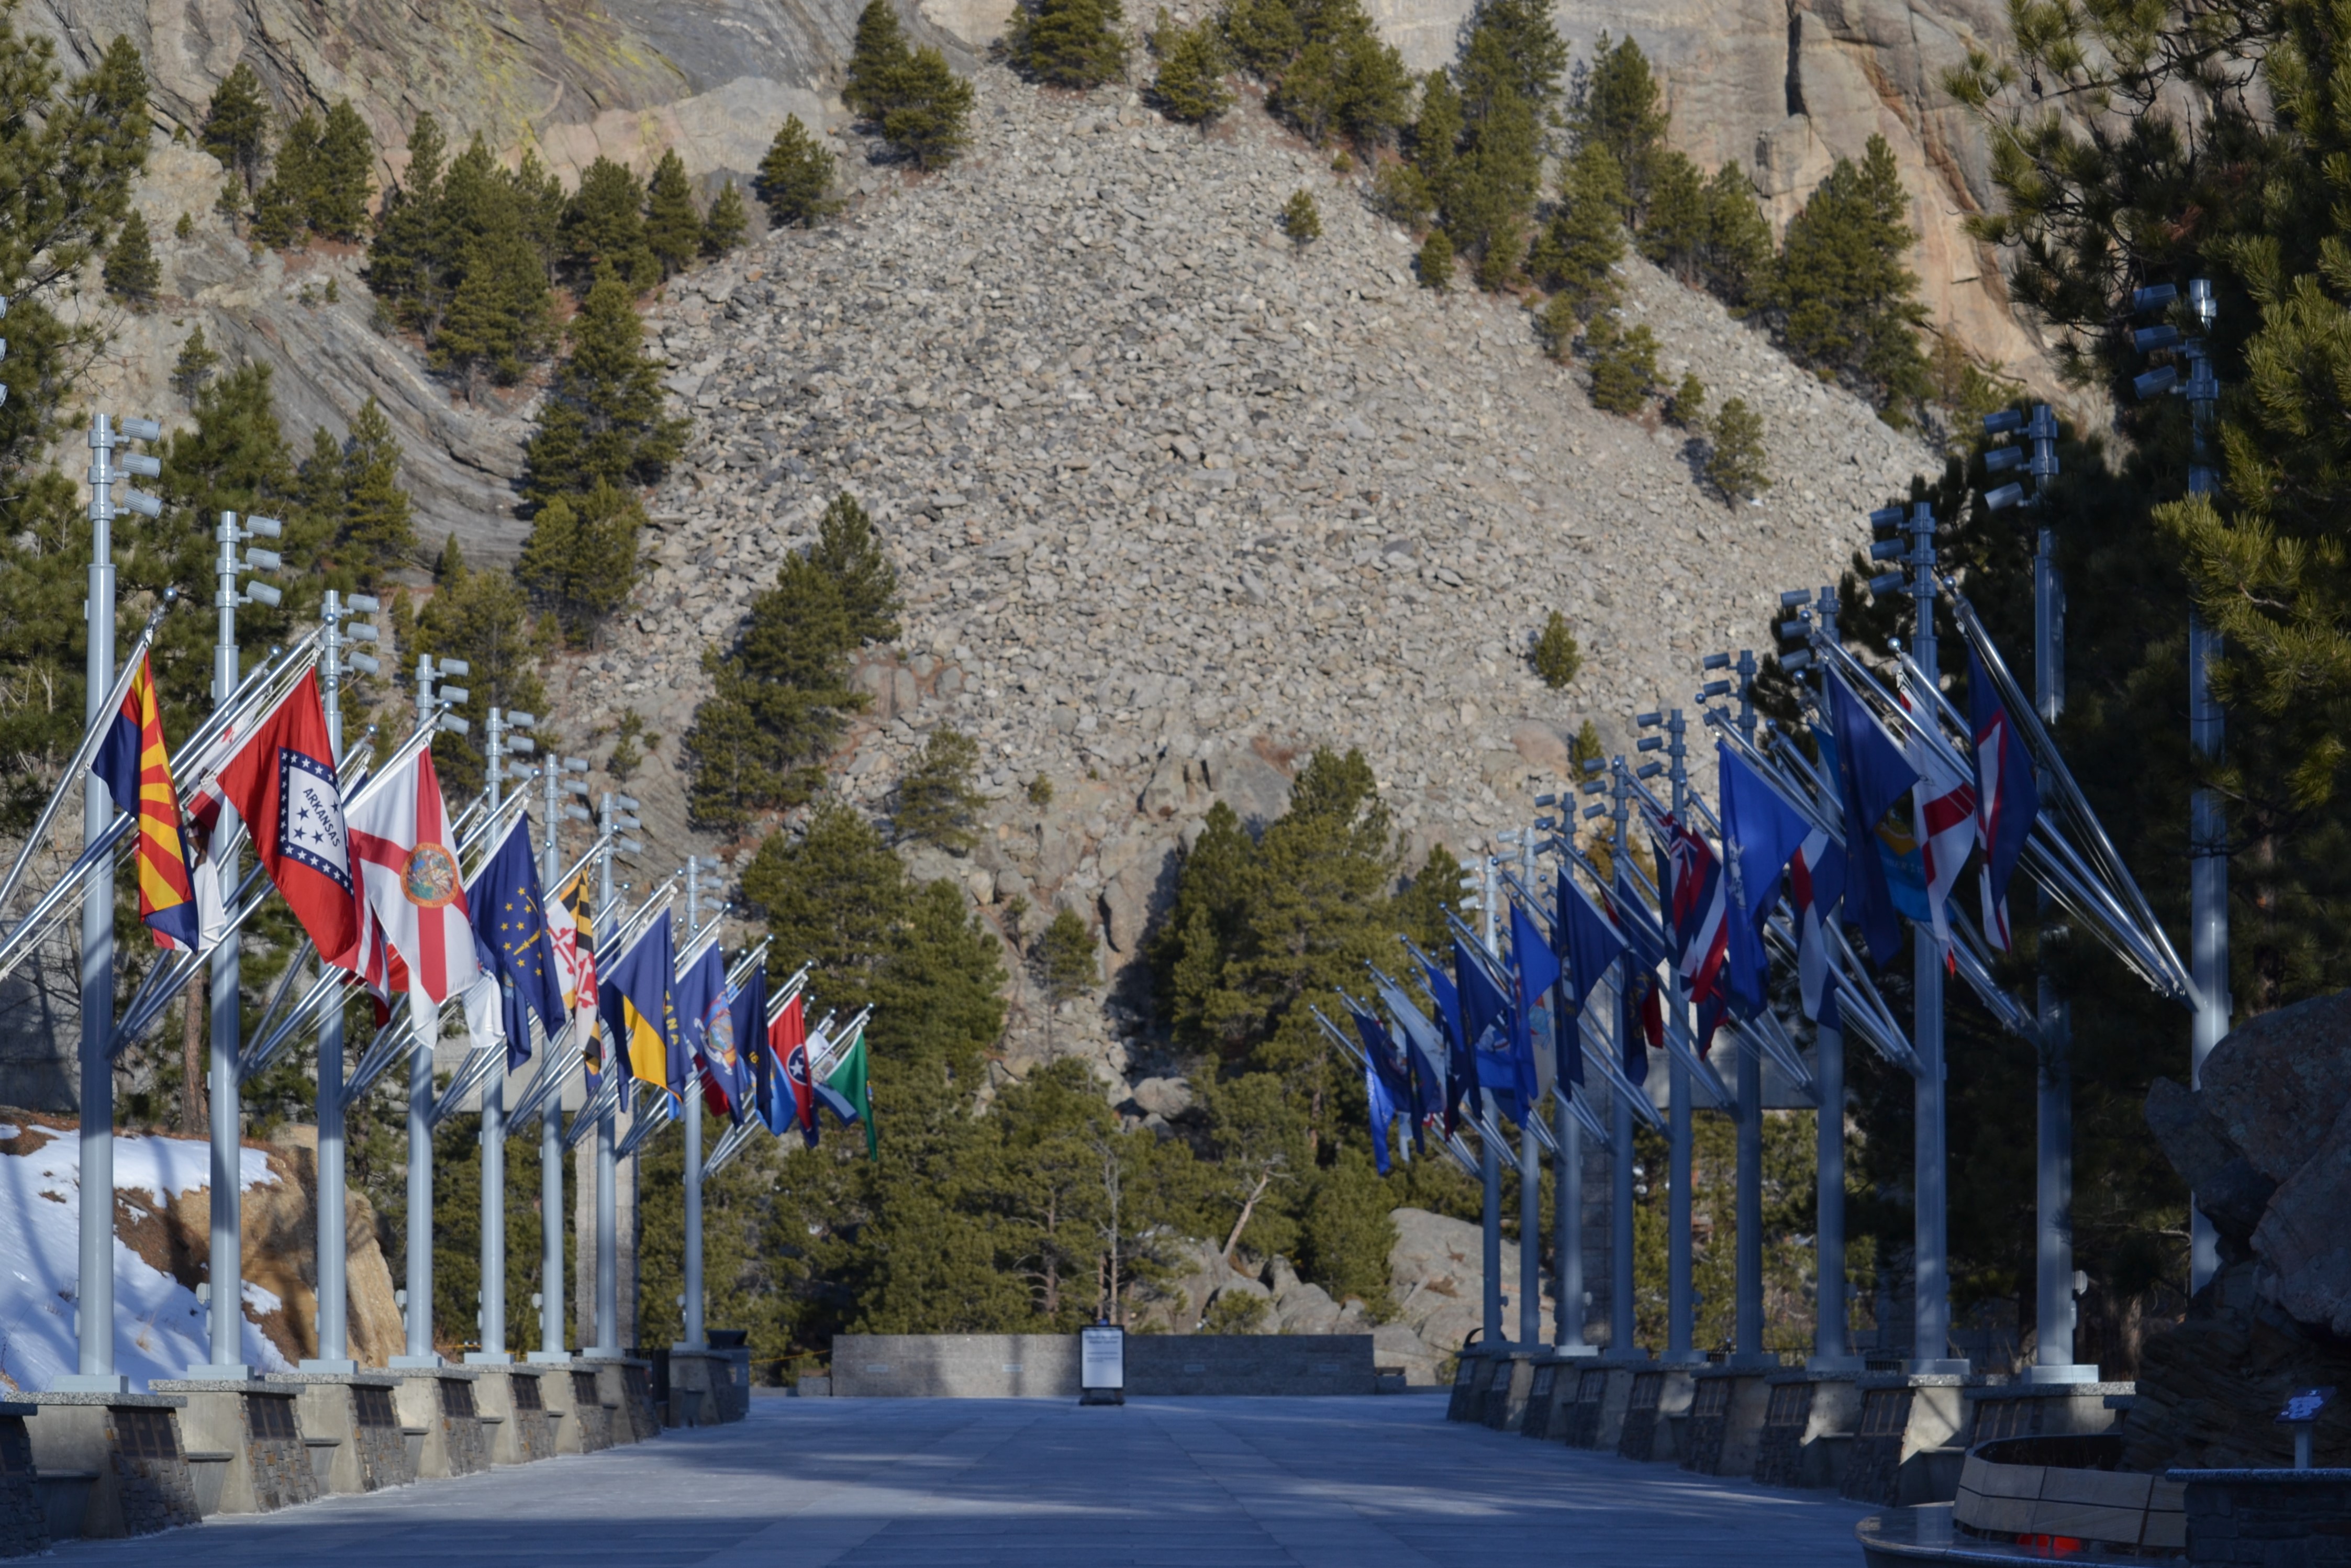 Dozens of state flags along a concrete walkway.